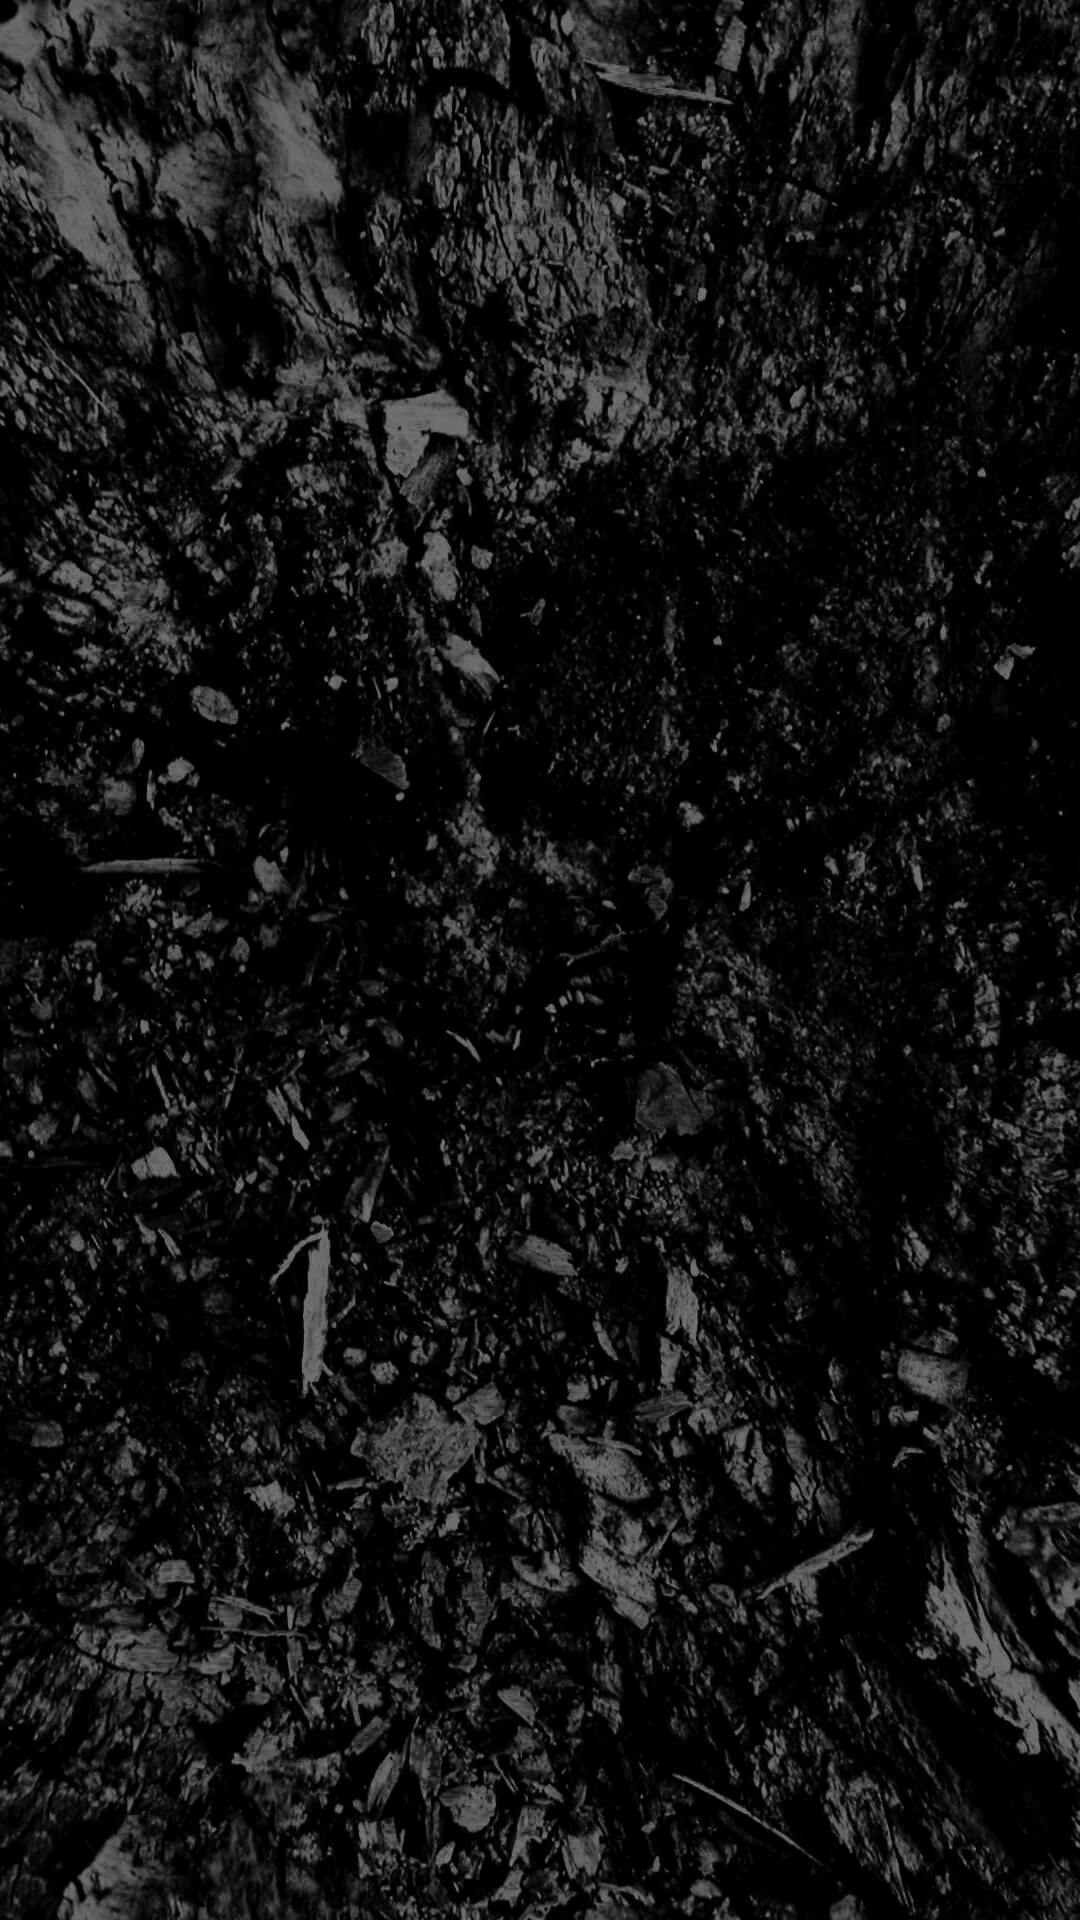 Wallpaper.wiki Abstract Black And White IPhone Wallpaper PIC